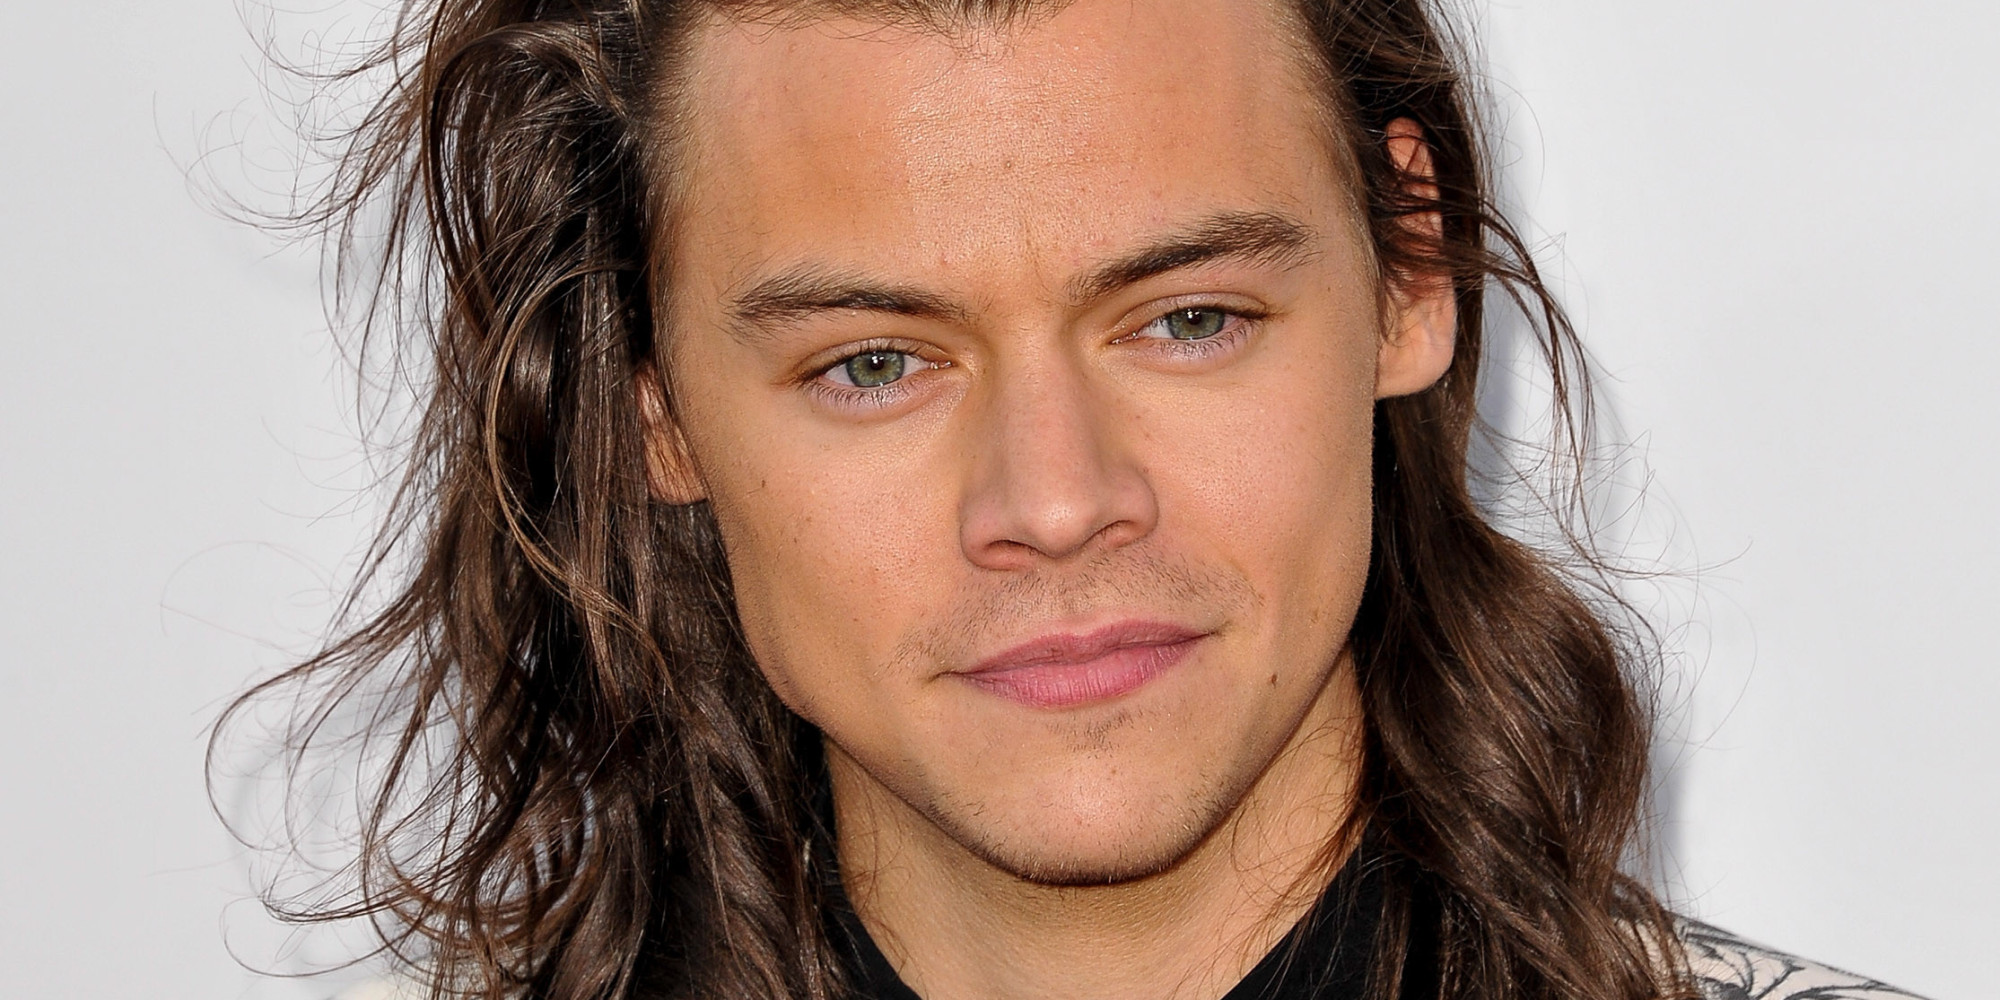 Singer Harry Styles of One Direction arrives at the 2015 American Music Awards at Microsoft Theater on November 22, 2015 in Los Angeles, California.